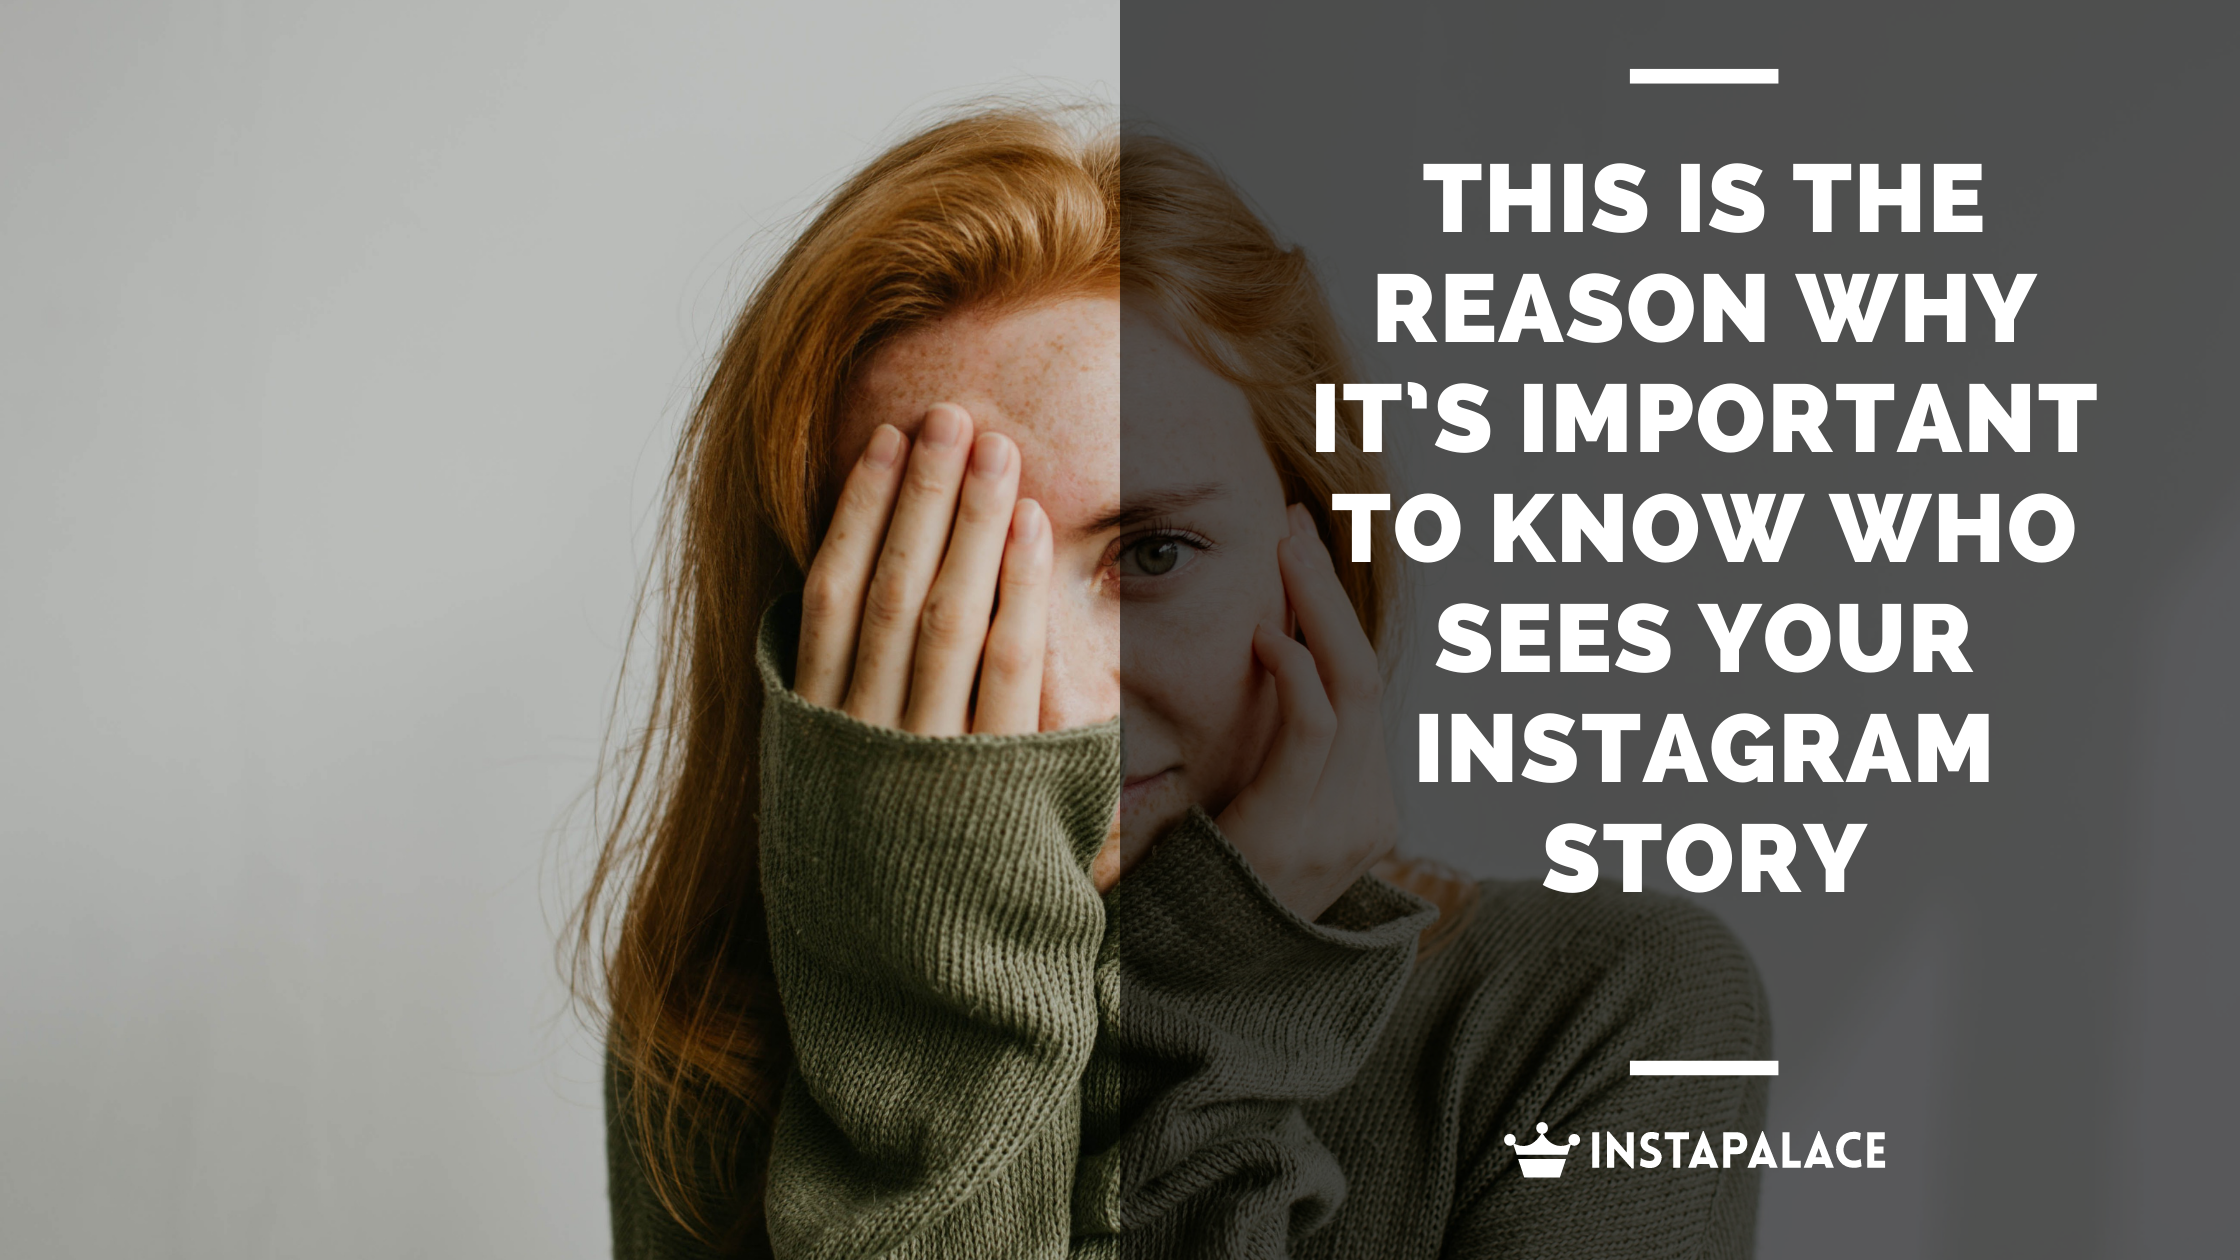 The Reason Why It’s Important To Know Who Sees Your Instagram Story